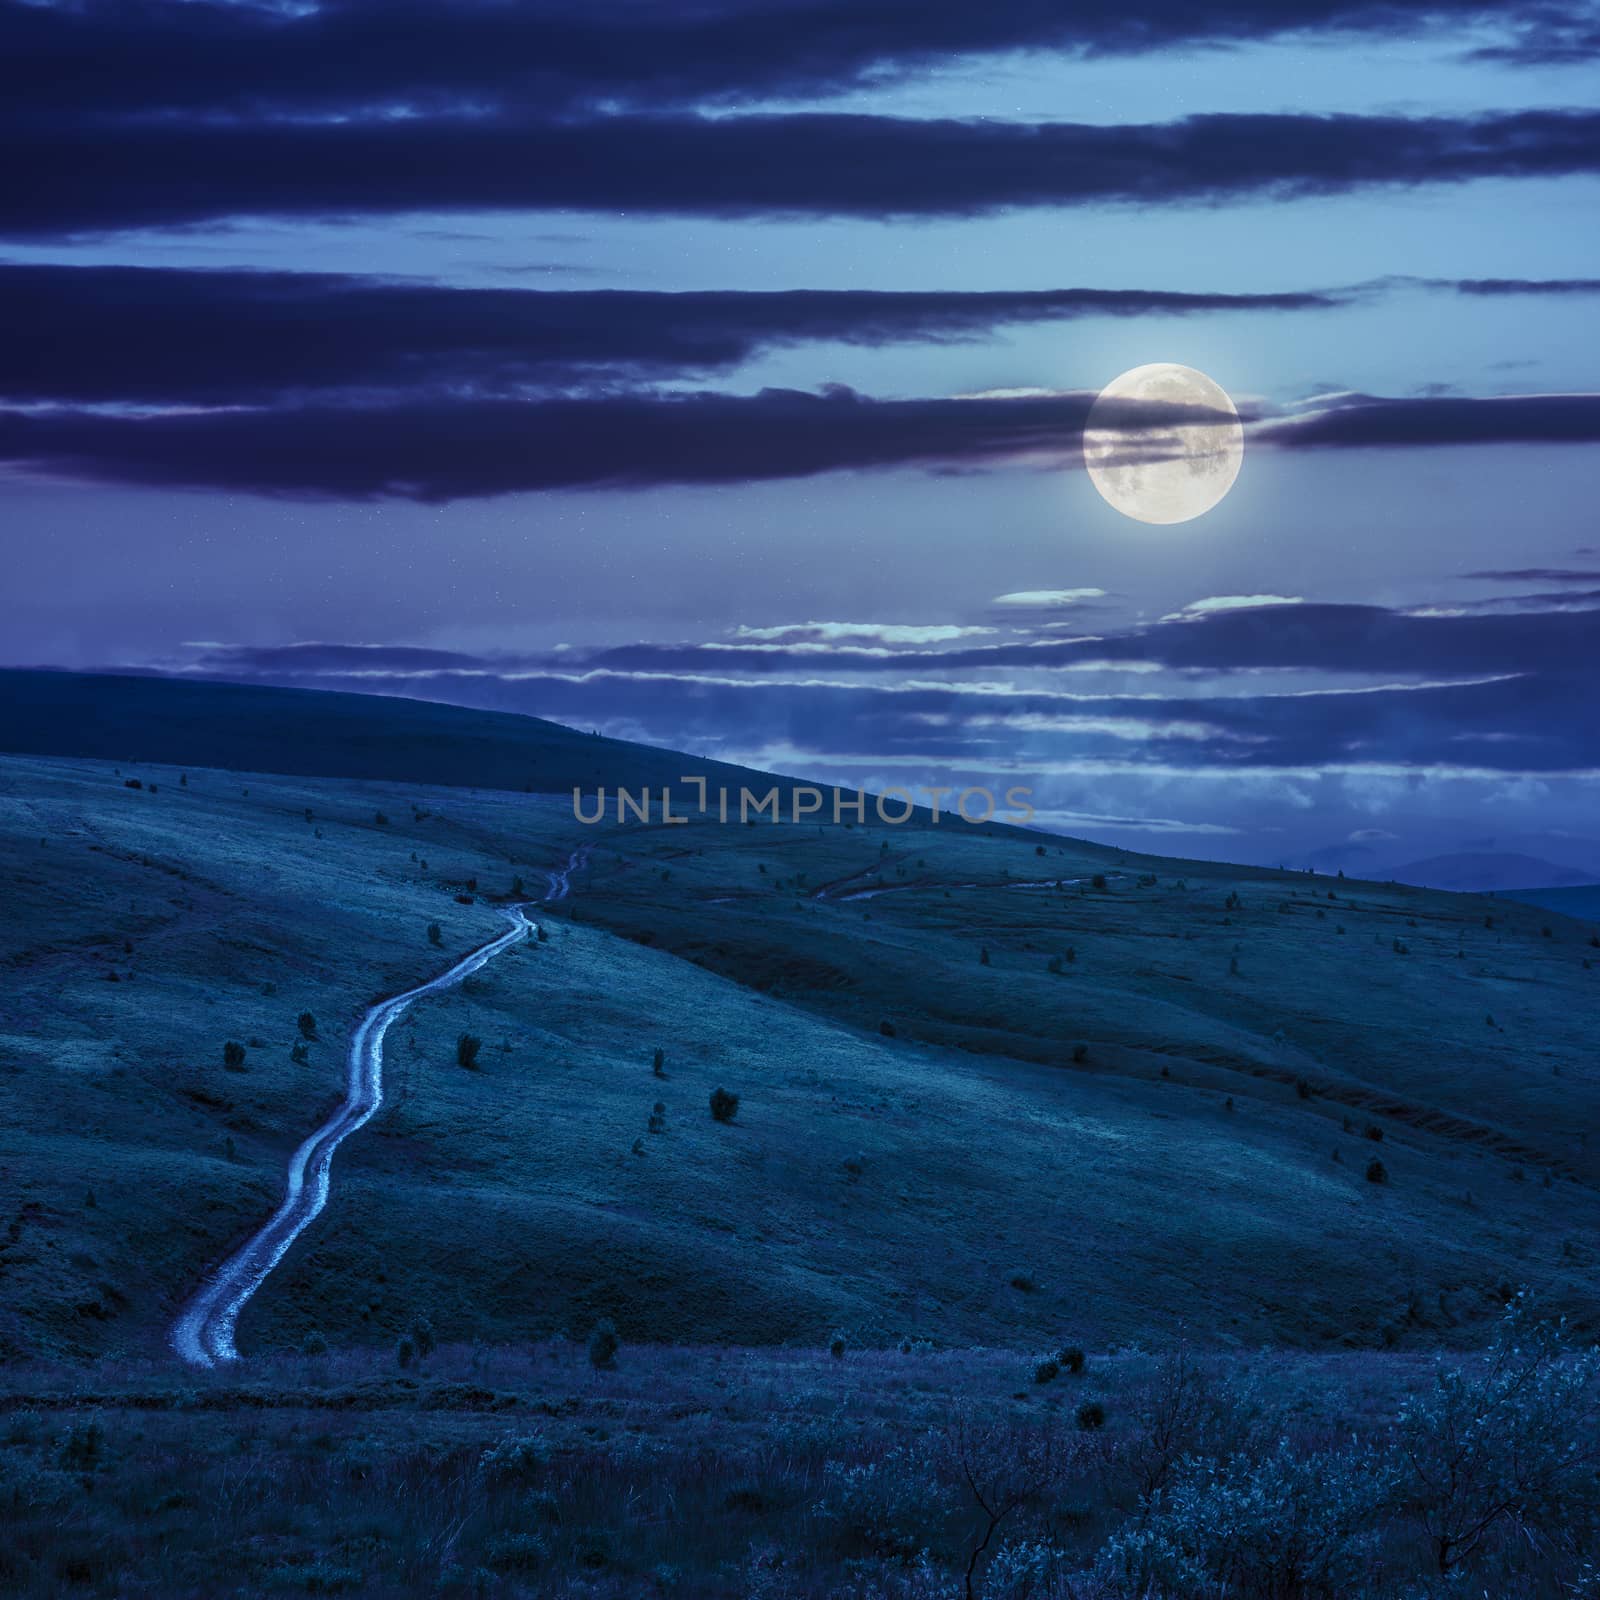 winding road through a large meadow on the hillside with some trees at night in moon light